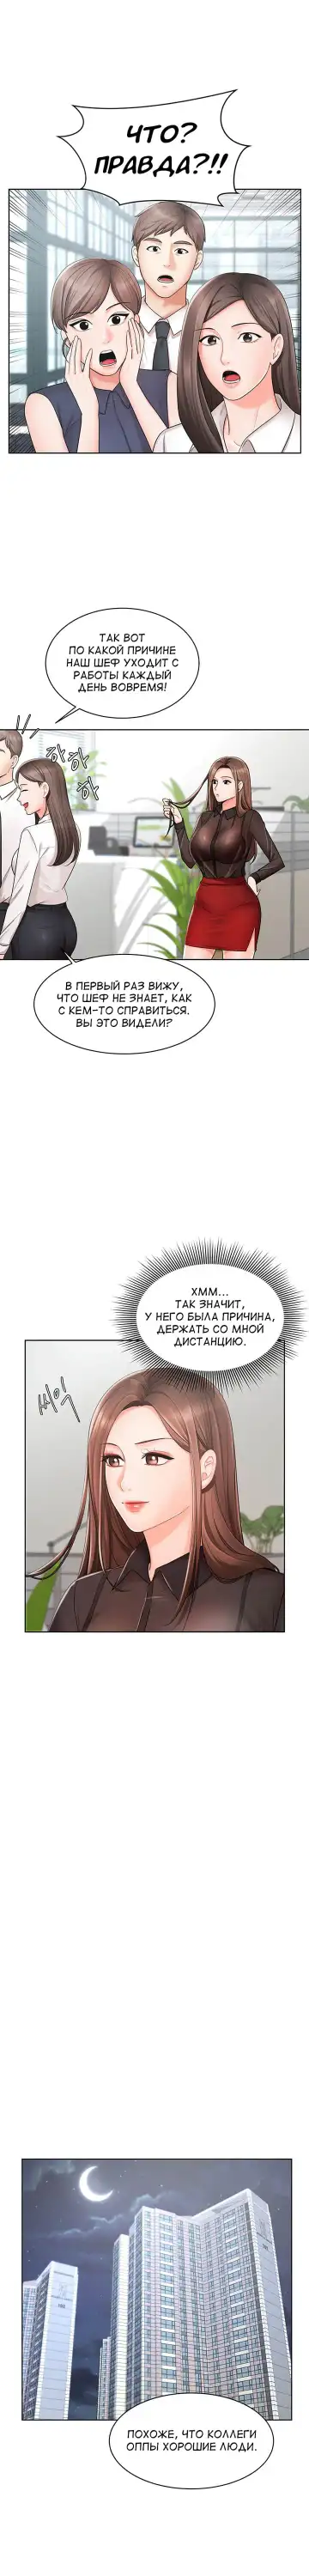 Sold Out Girl | Продажная девушка Fhentai.net - Page 29